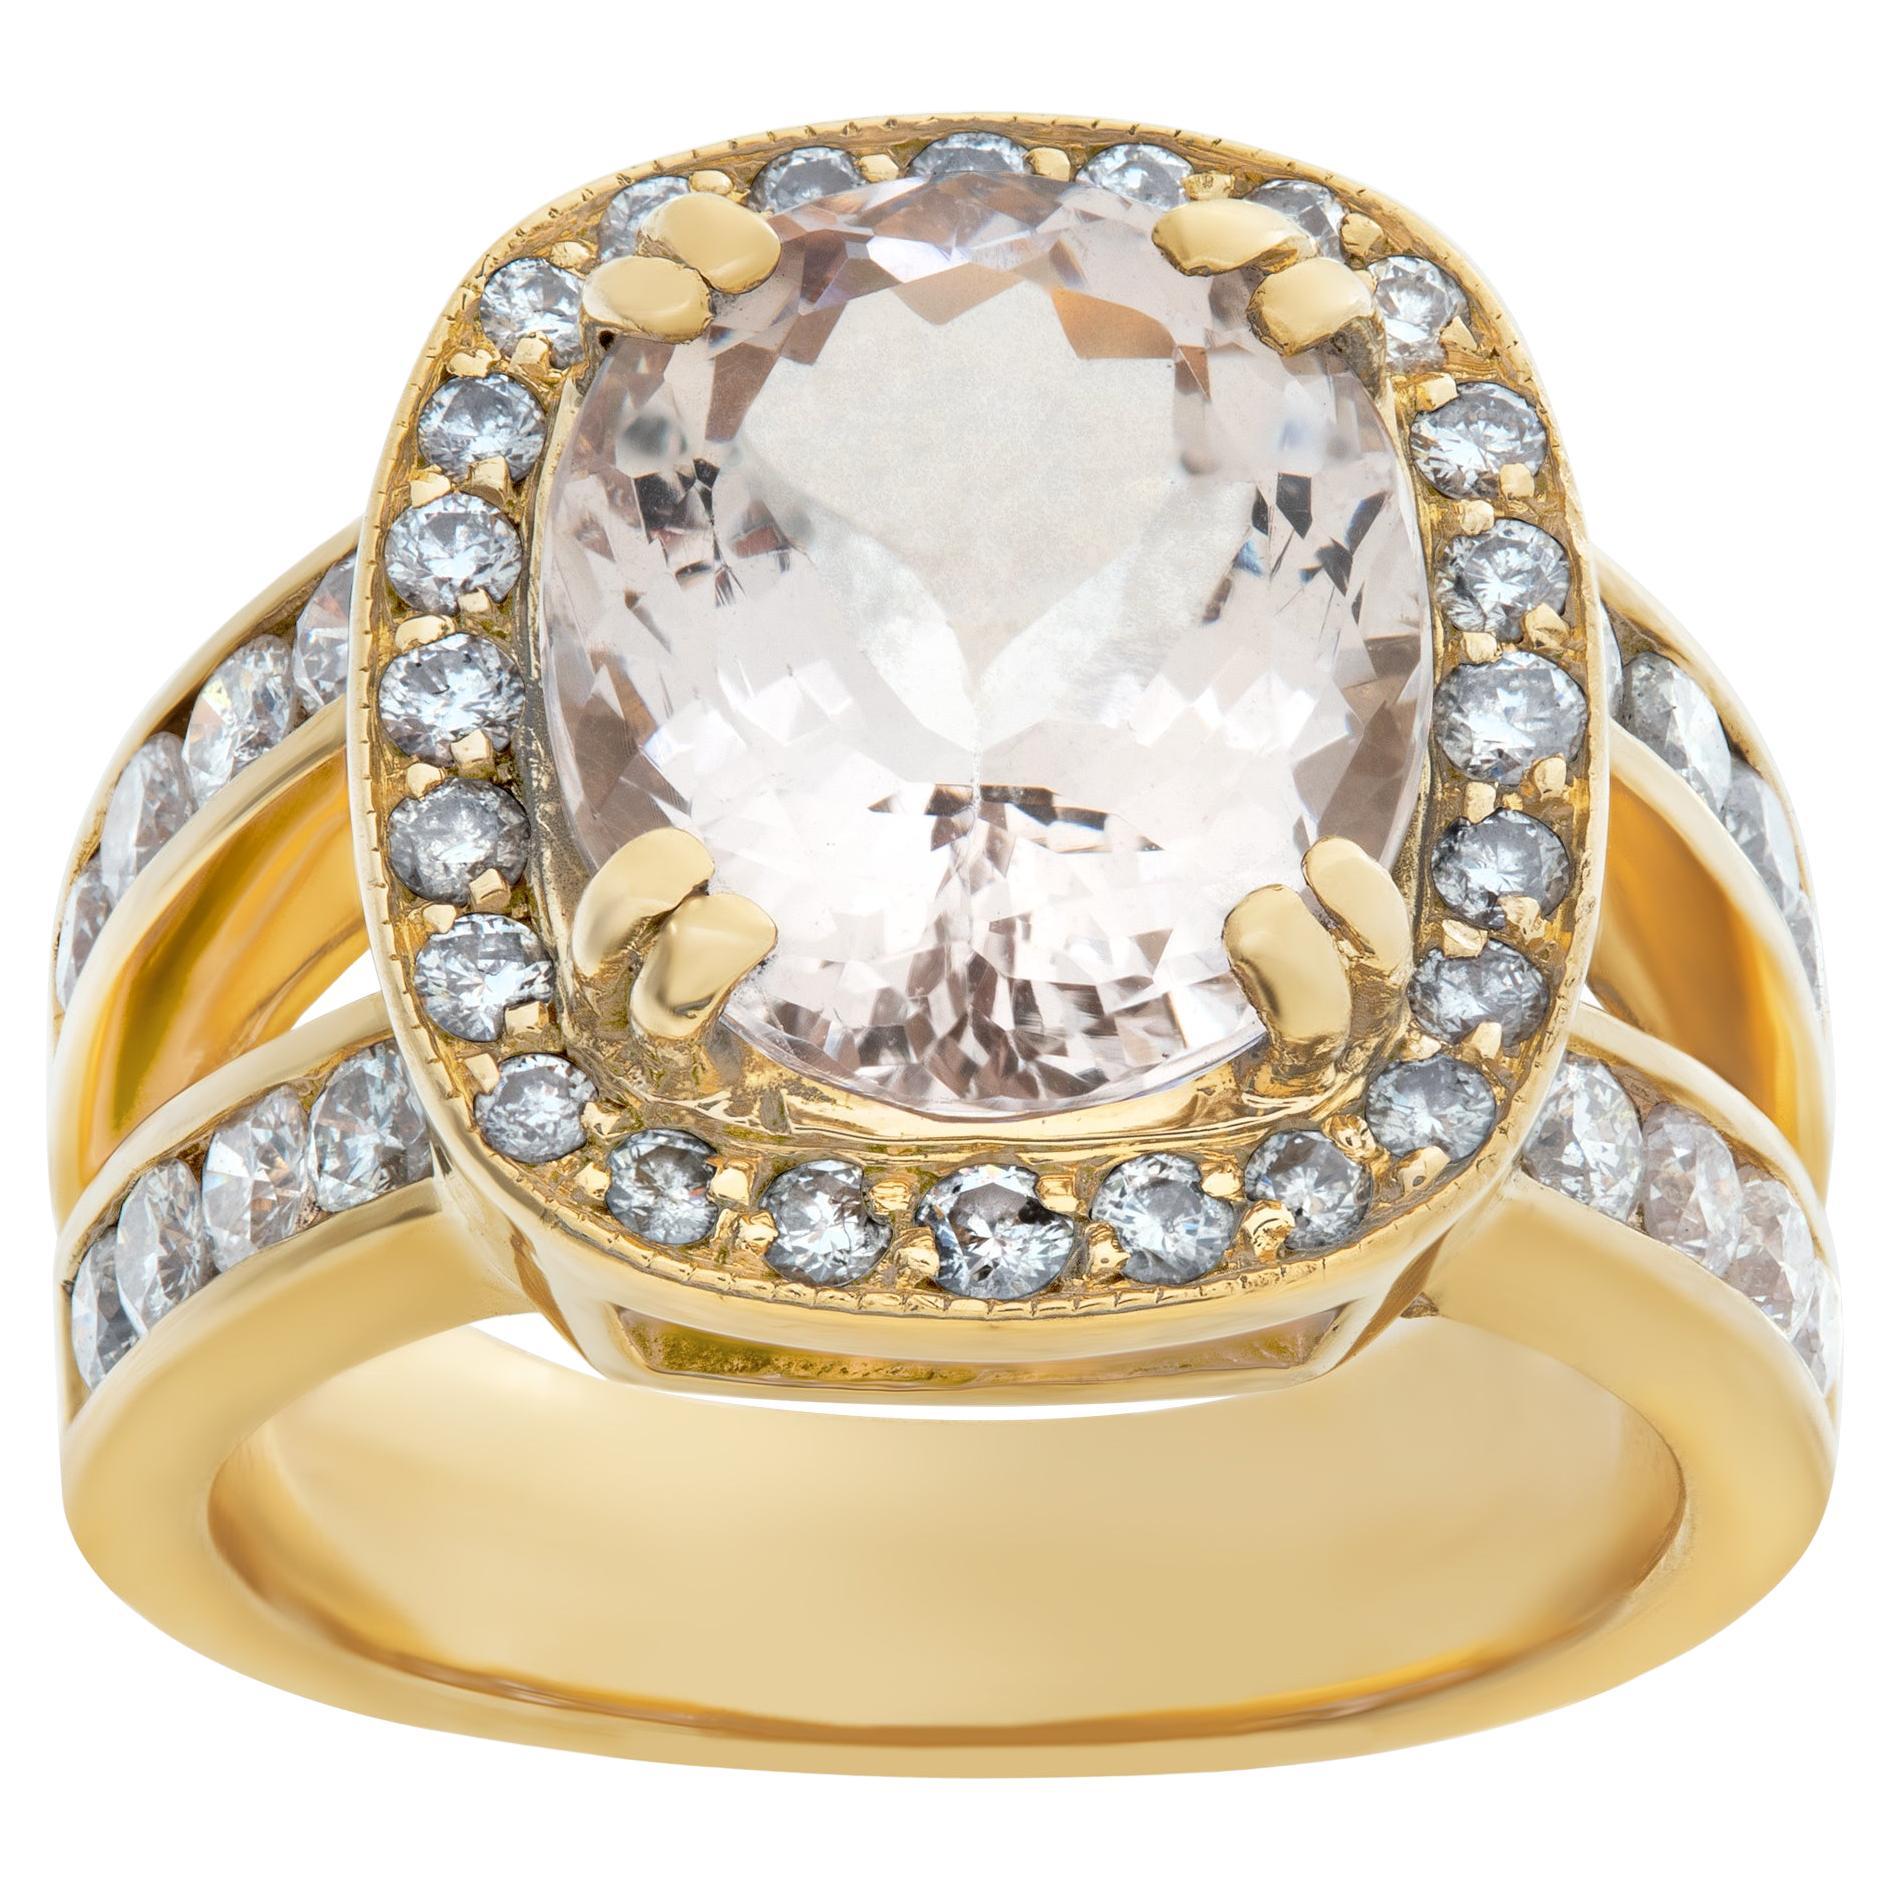 18k Yellow Gold Ring with Cushion Cut Morganite Stone, 'Over 5.30 Carats'